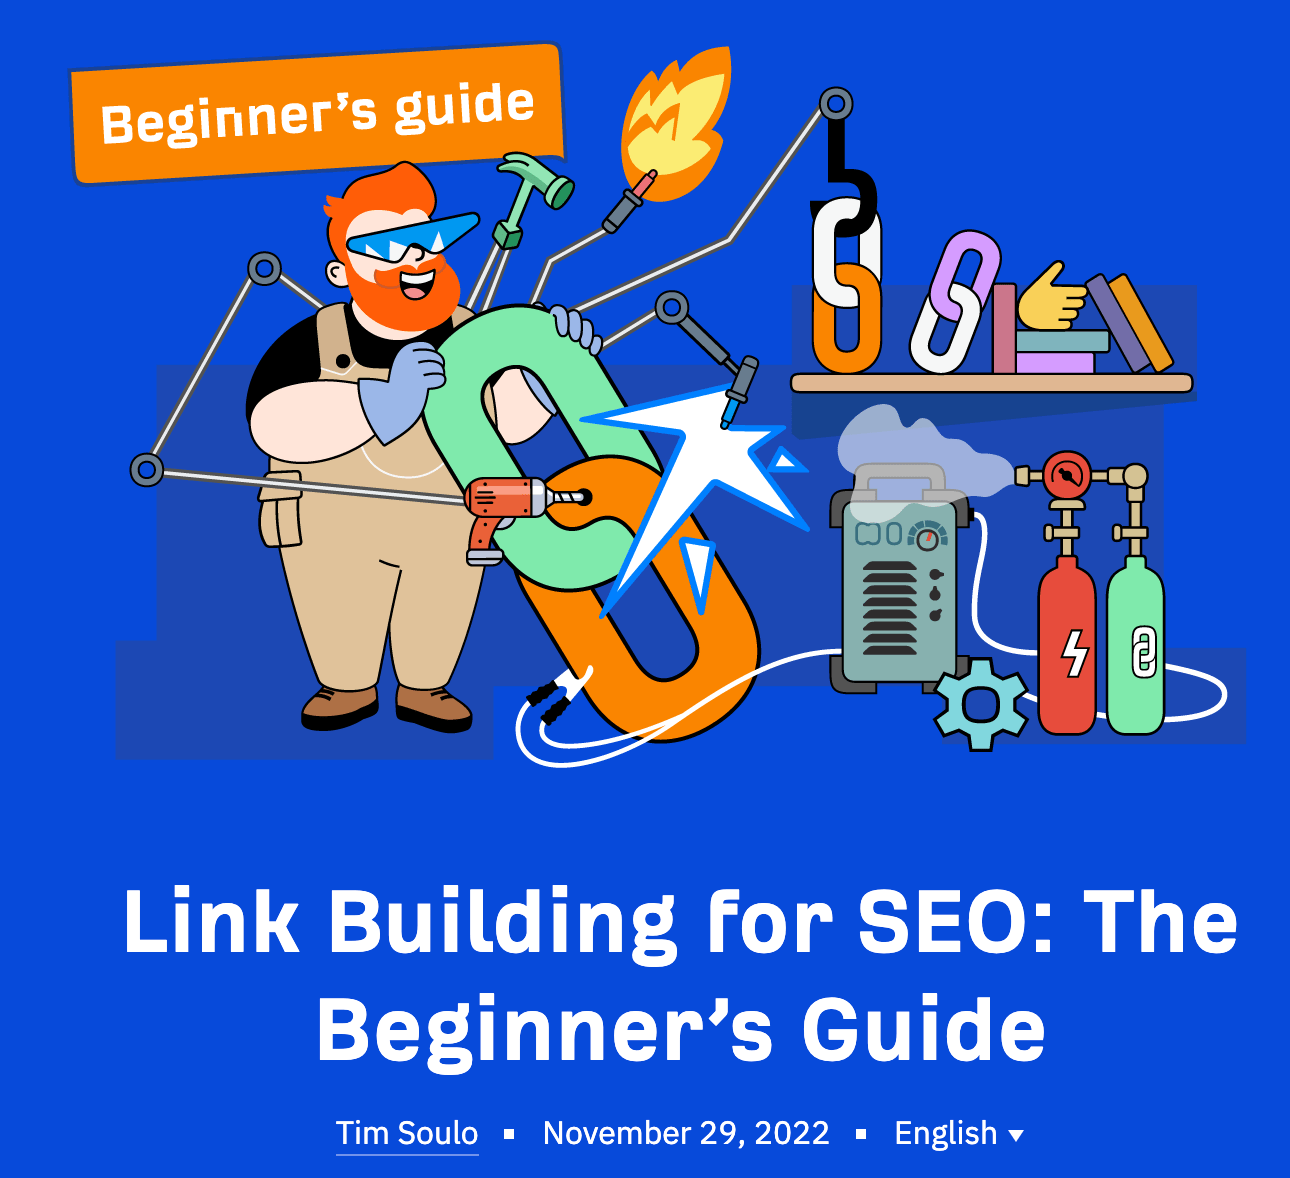 Ahrefs' link building guide